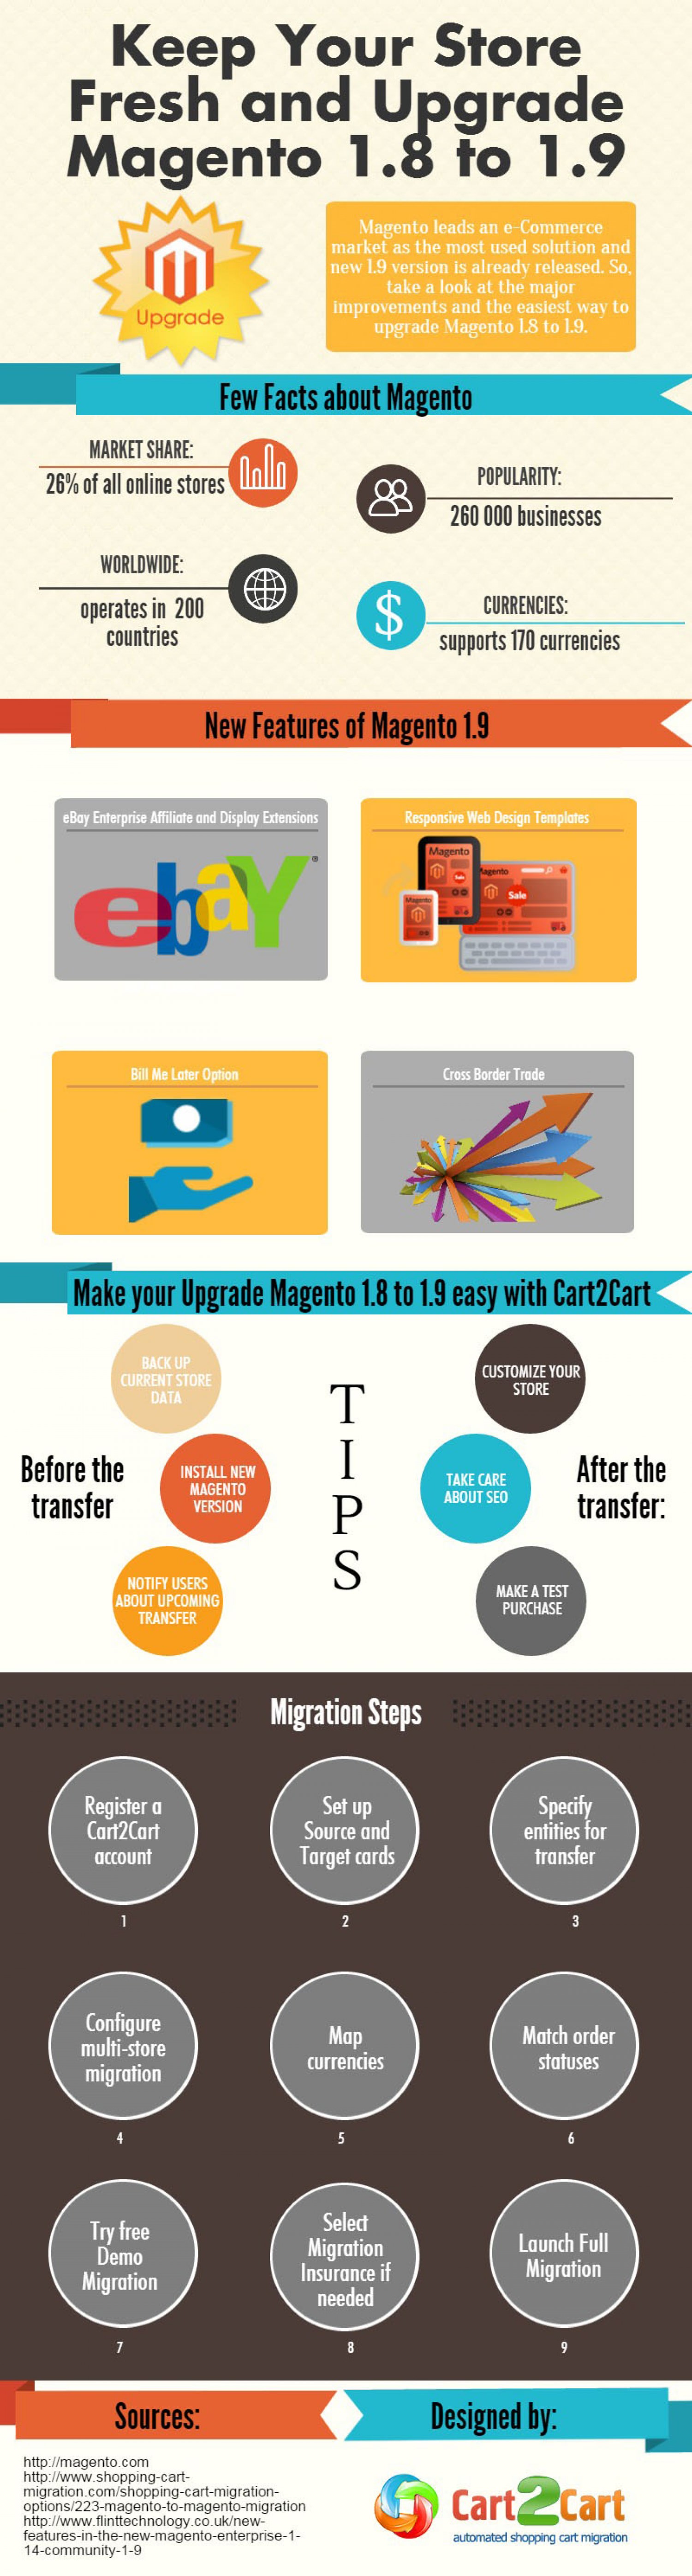 Upgrade Magento 1.8 to 1.9 - New Lands to Discover - Infographic